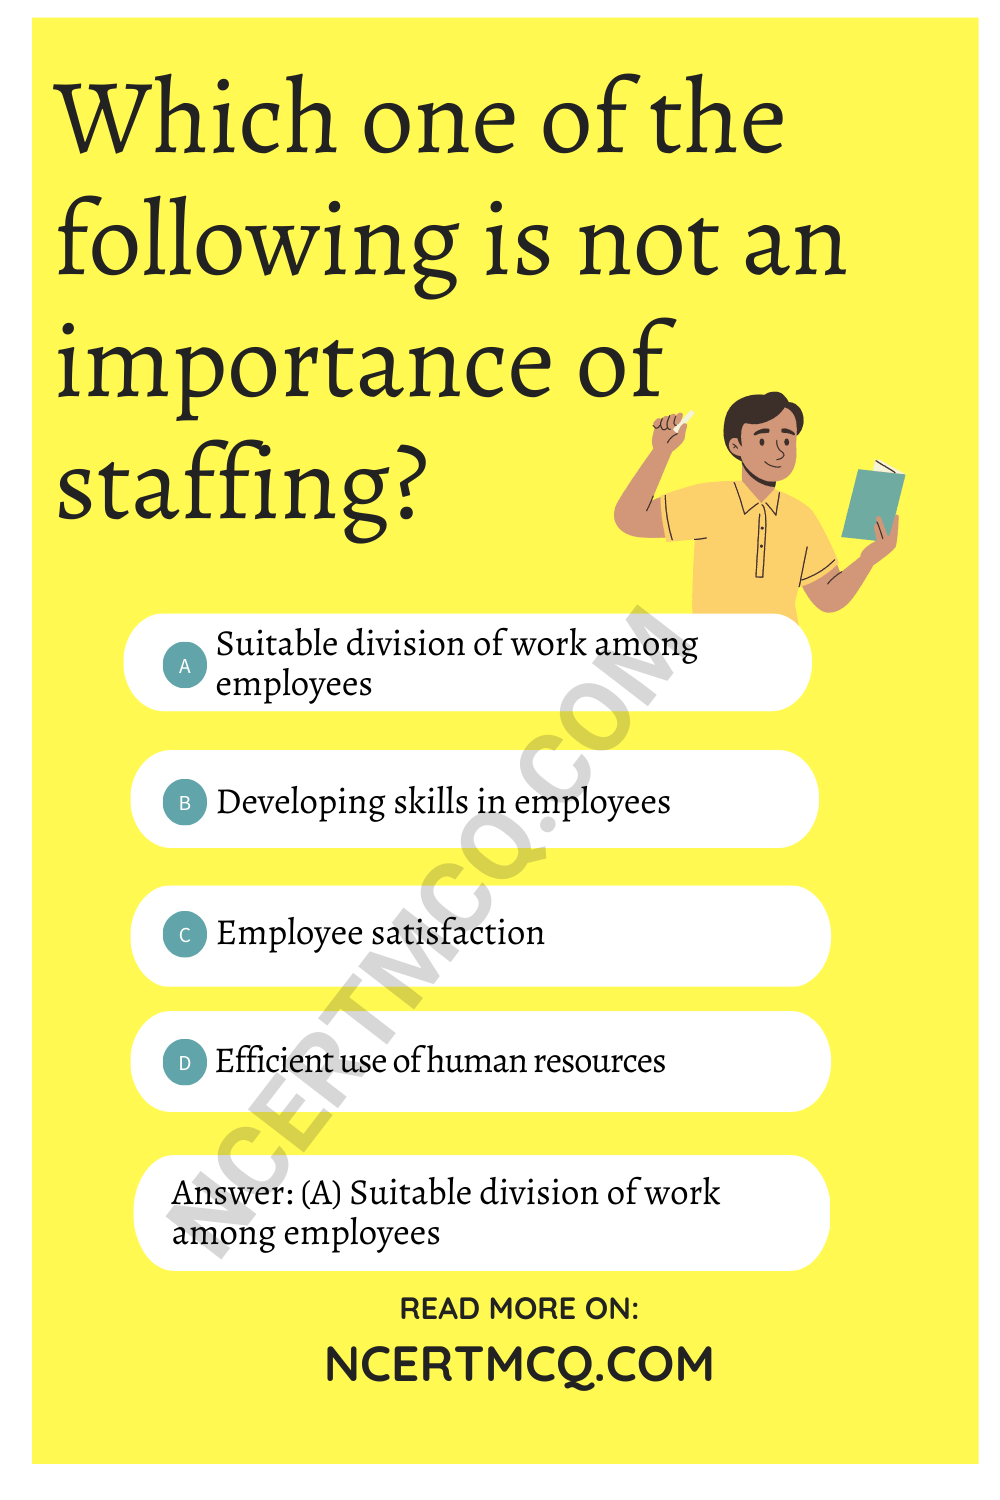 Which one of the following is not an importance of staffing?